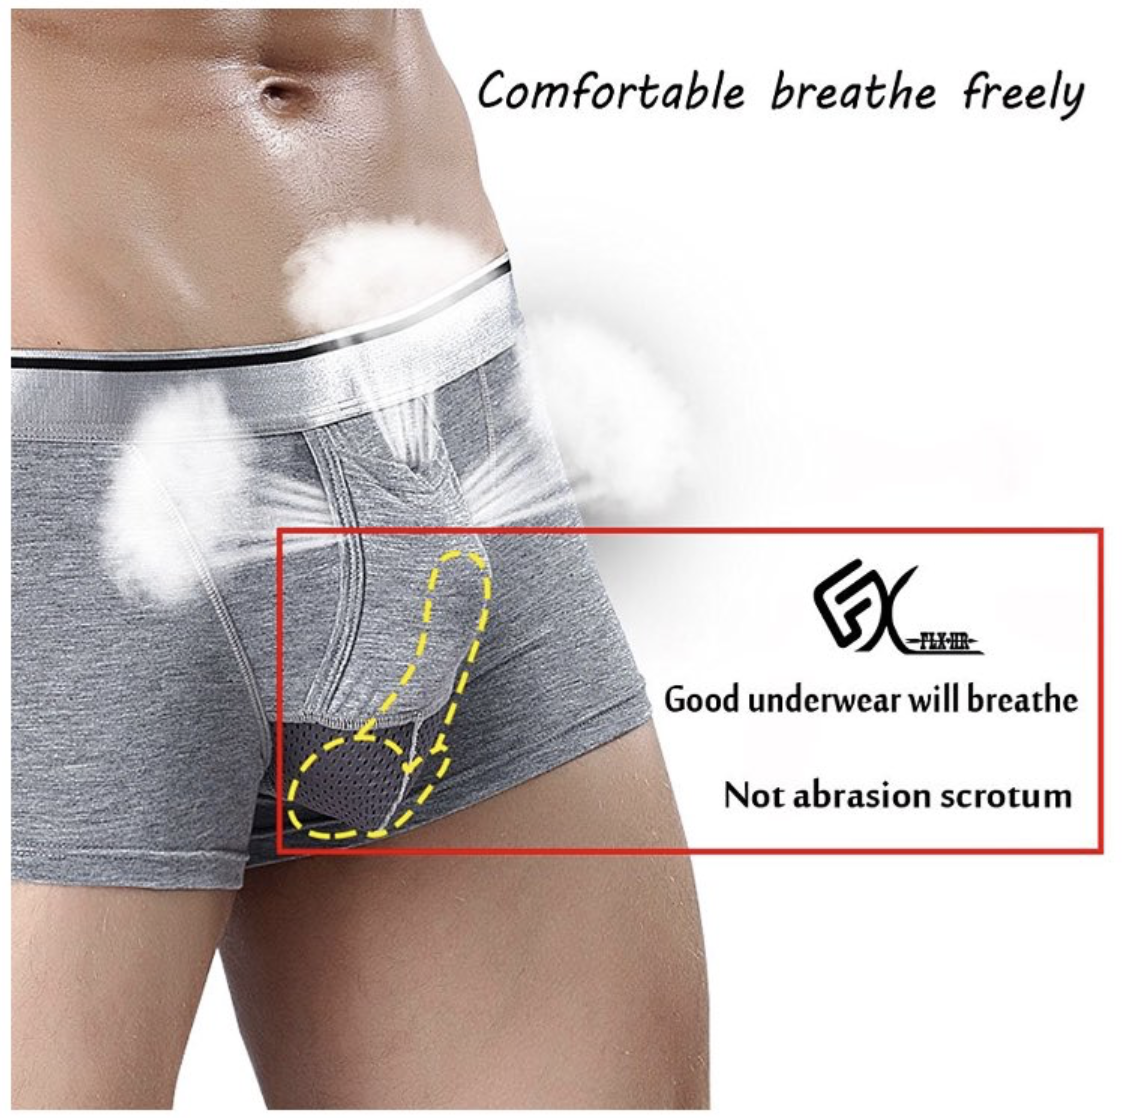 This Chinese Underwear Company Has A Masterful Marketing Campaign 